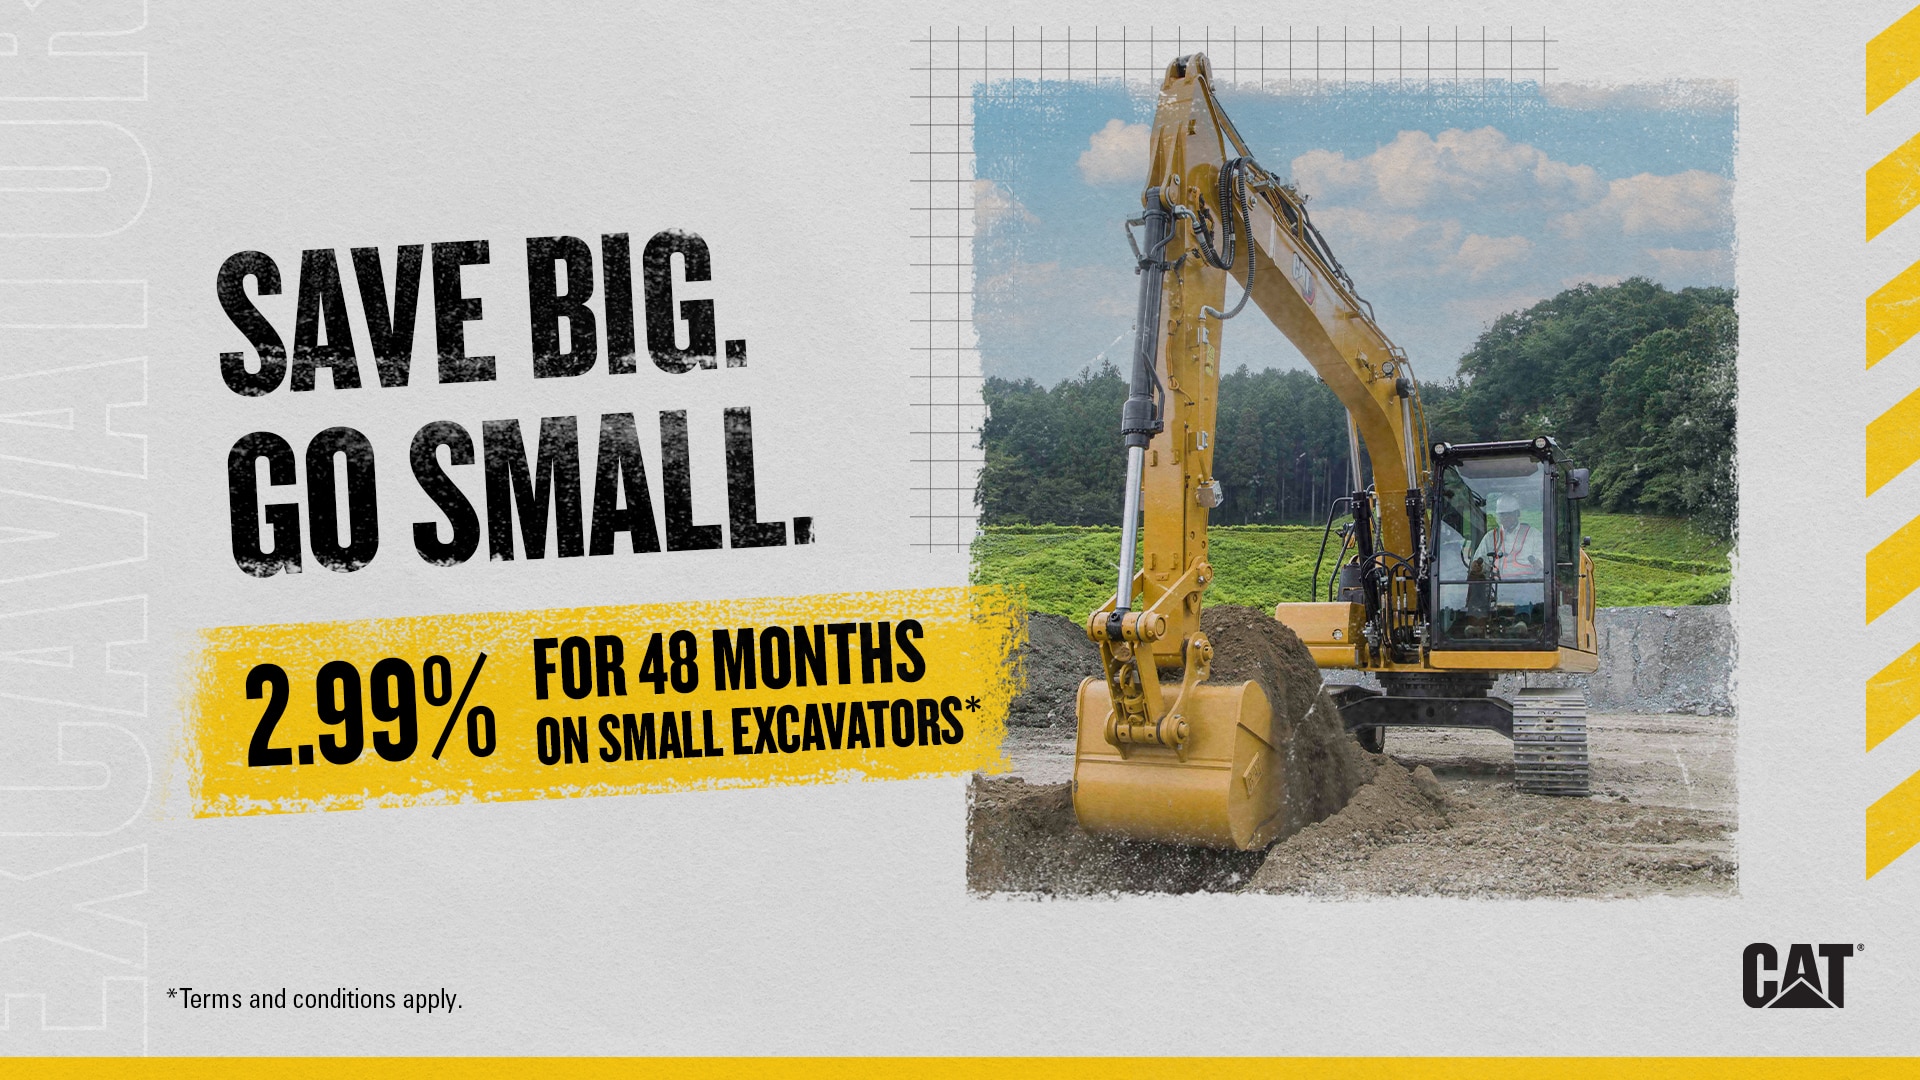 Small Excavators with Rates as Low as 2.99% for 48 Months*